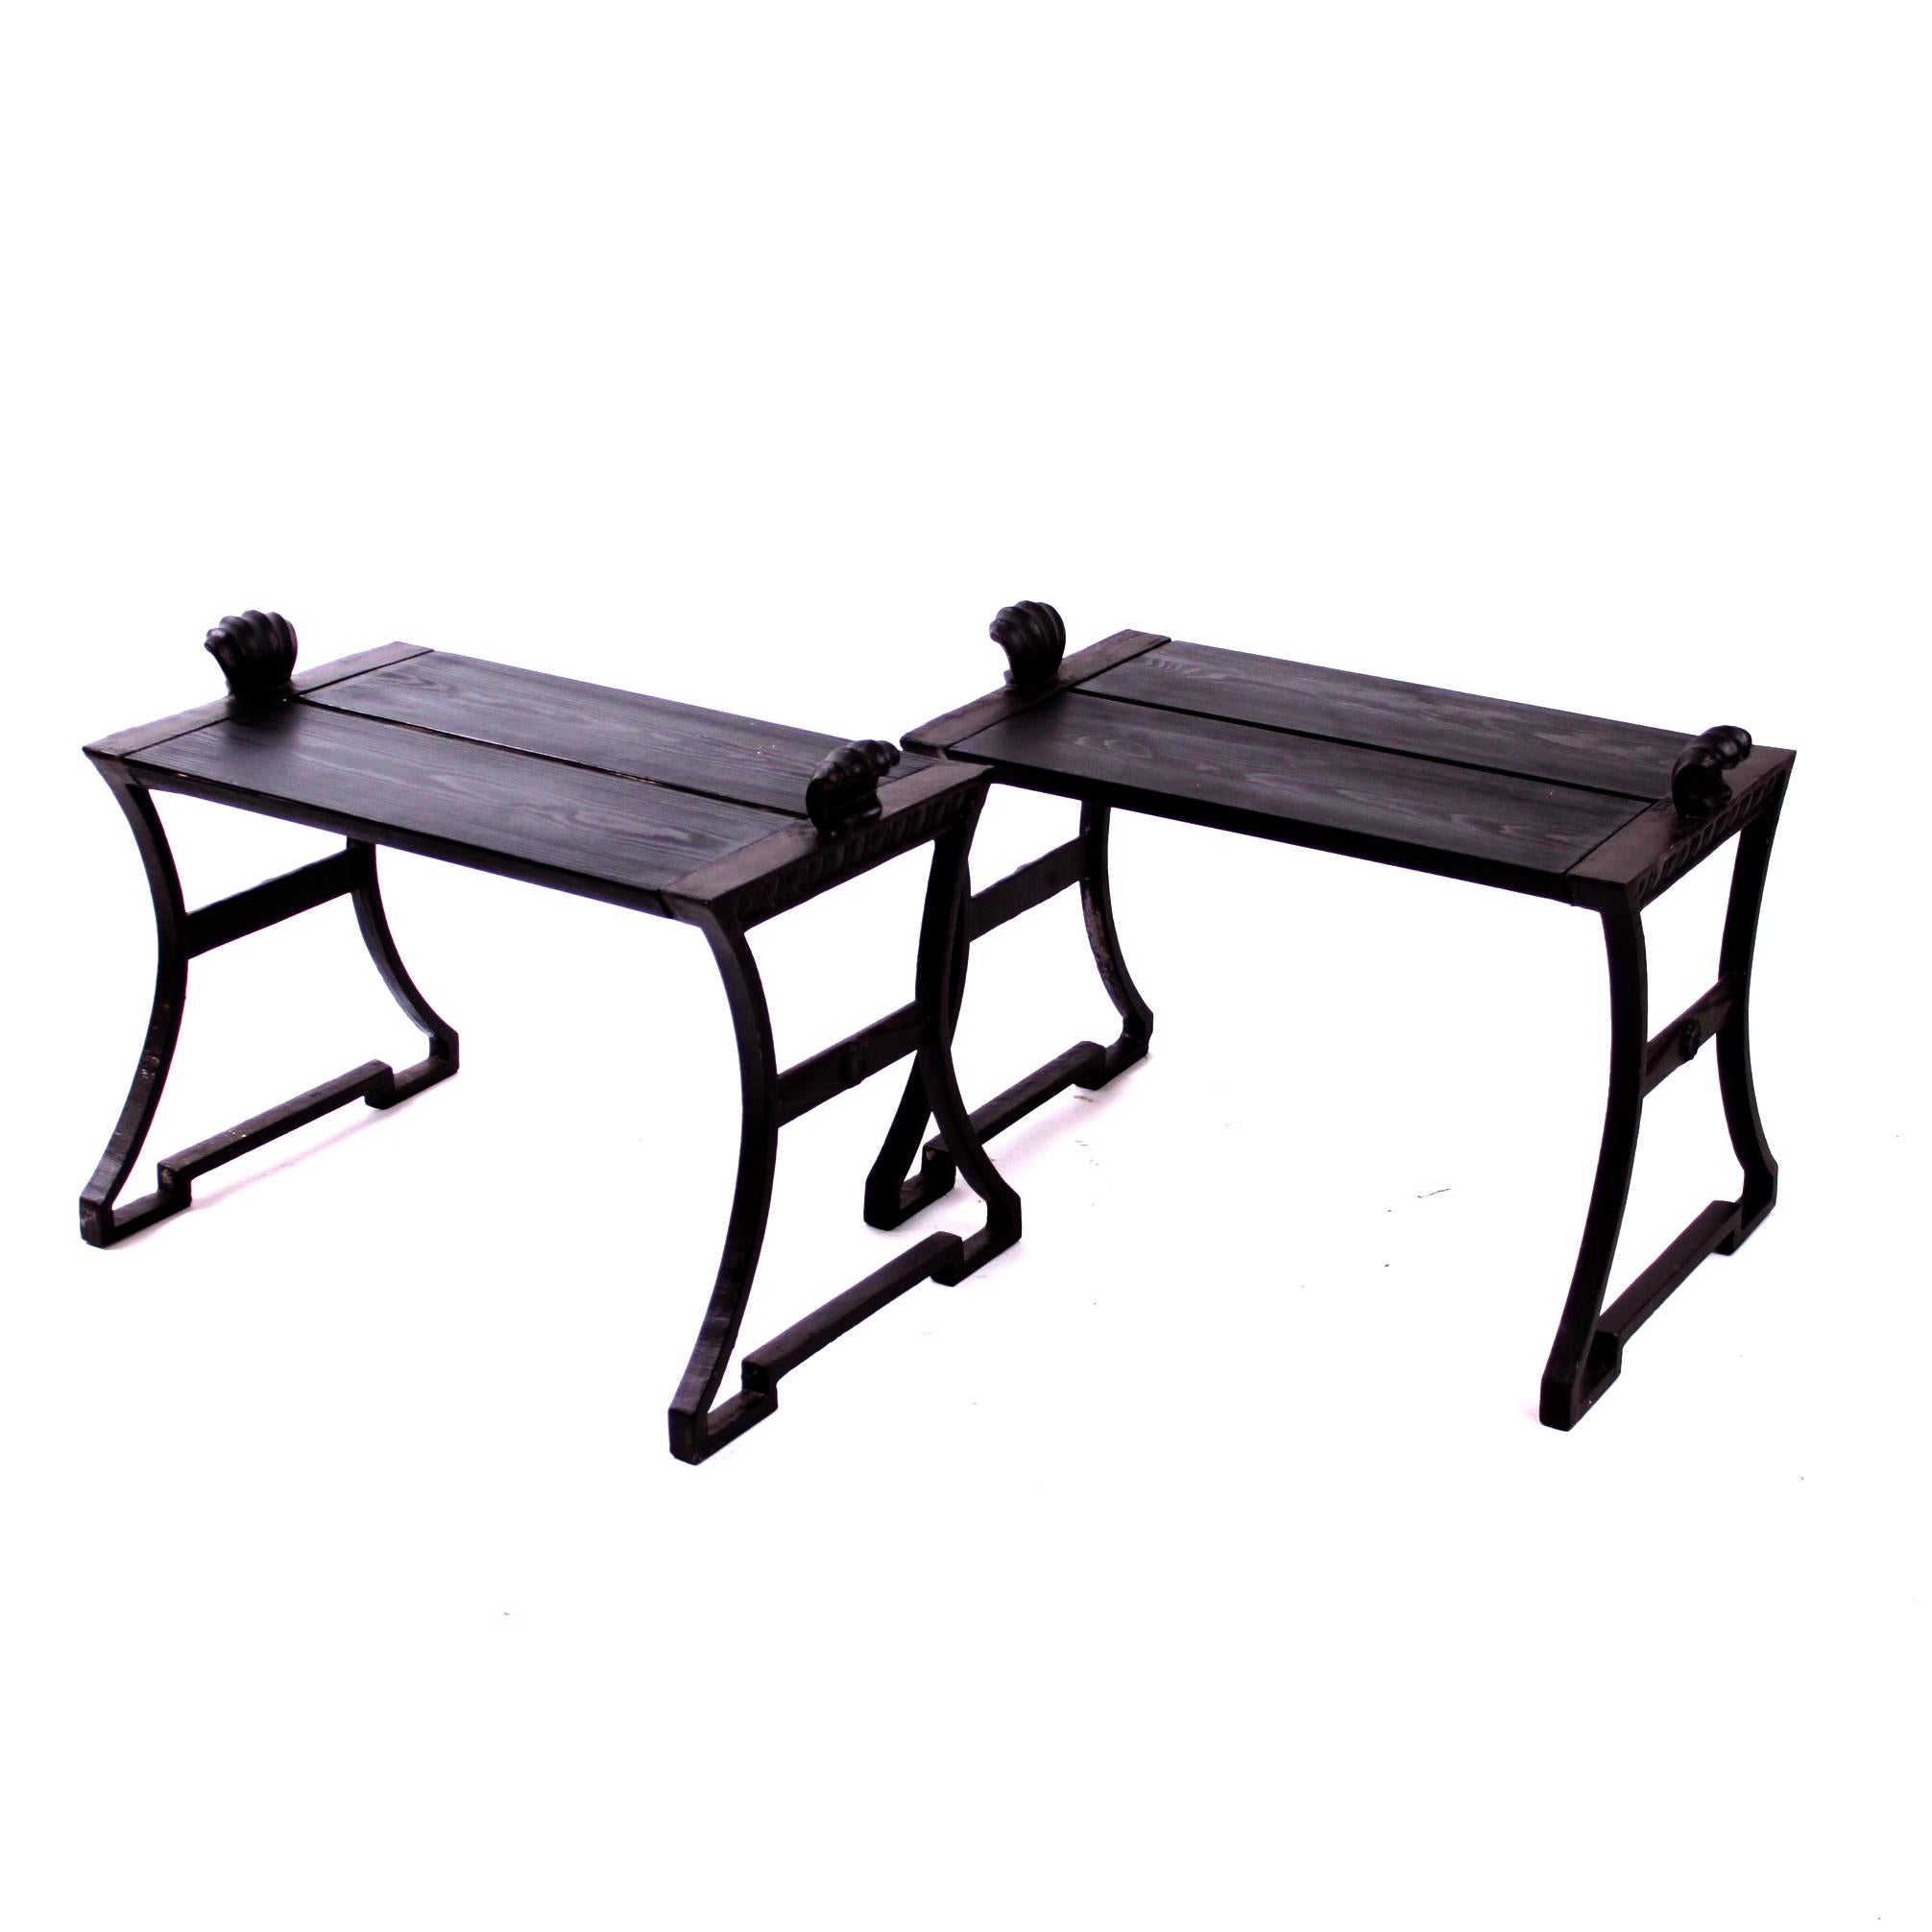 Painted Pair of Folke Bensow Benches, Dessin Park Bench No. 1, Sweden For Sale